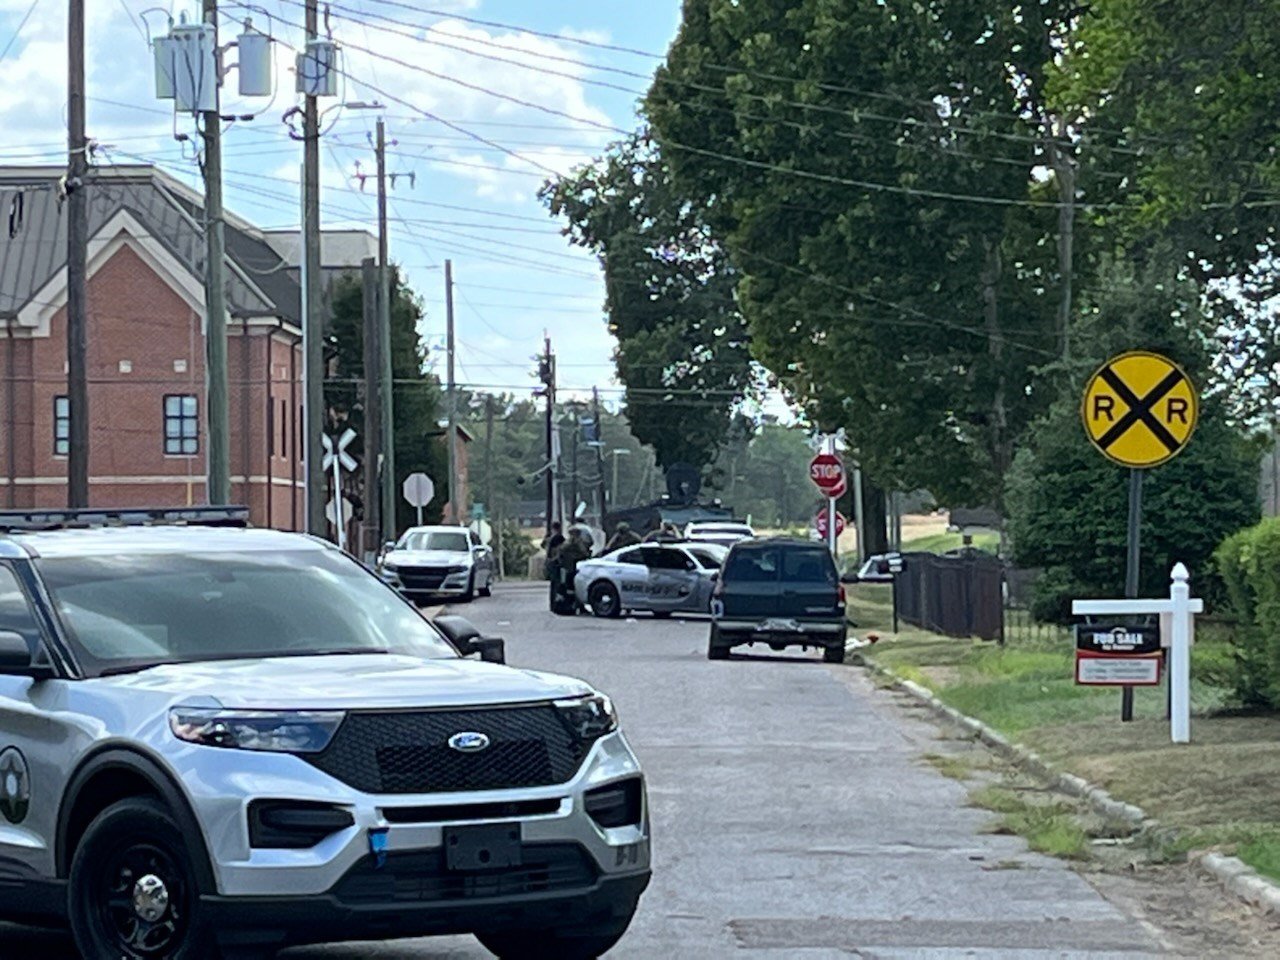 Scene of standoff with barricaded subject on Hunter St. Photo date: Aug. 1, 2022